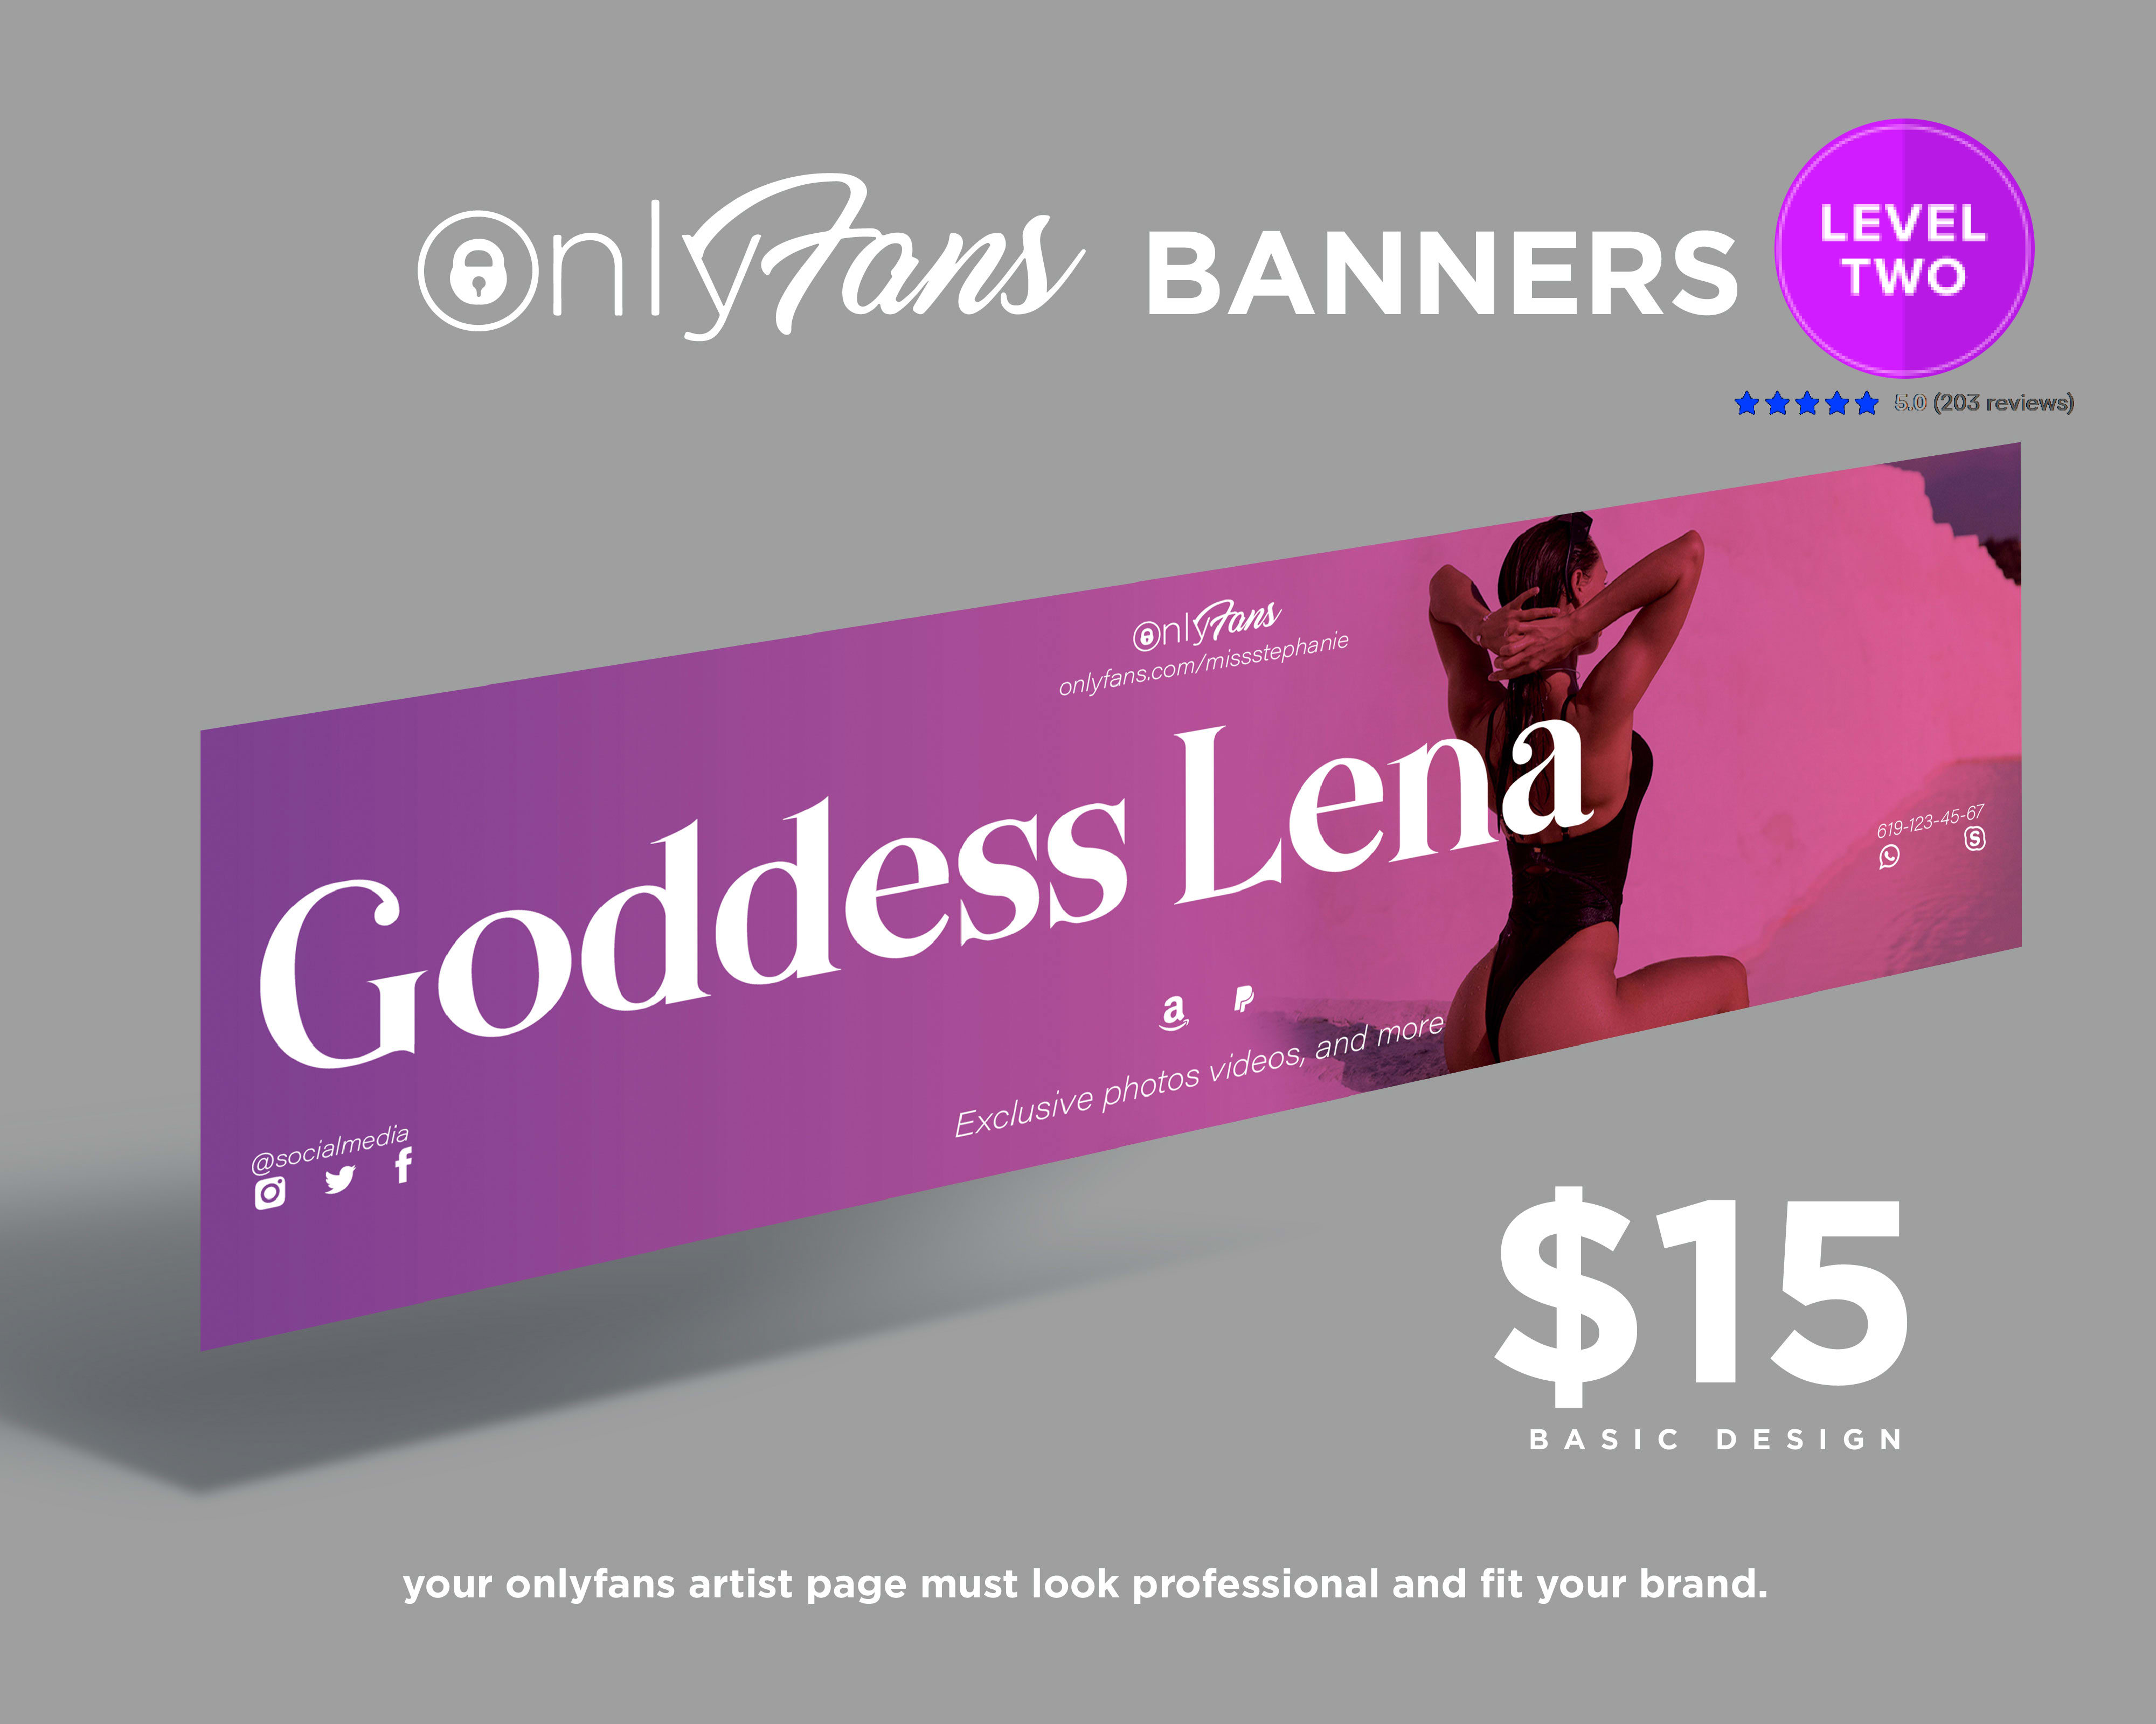 Banner only size fans Image Sizes